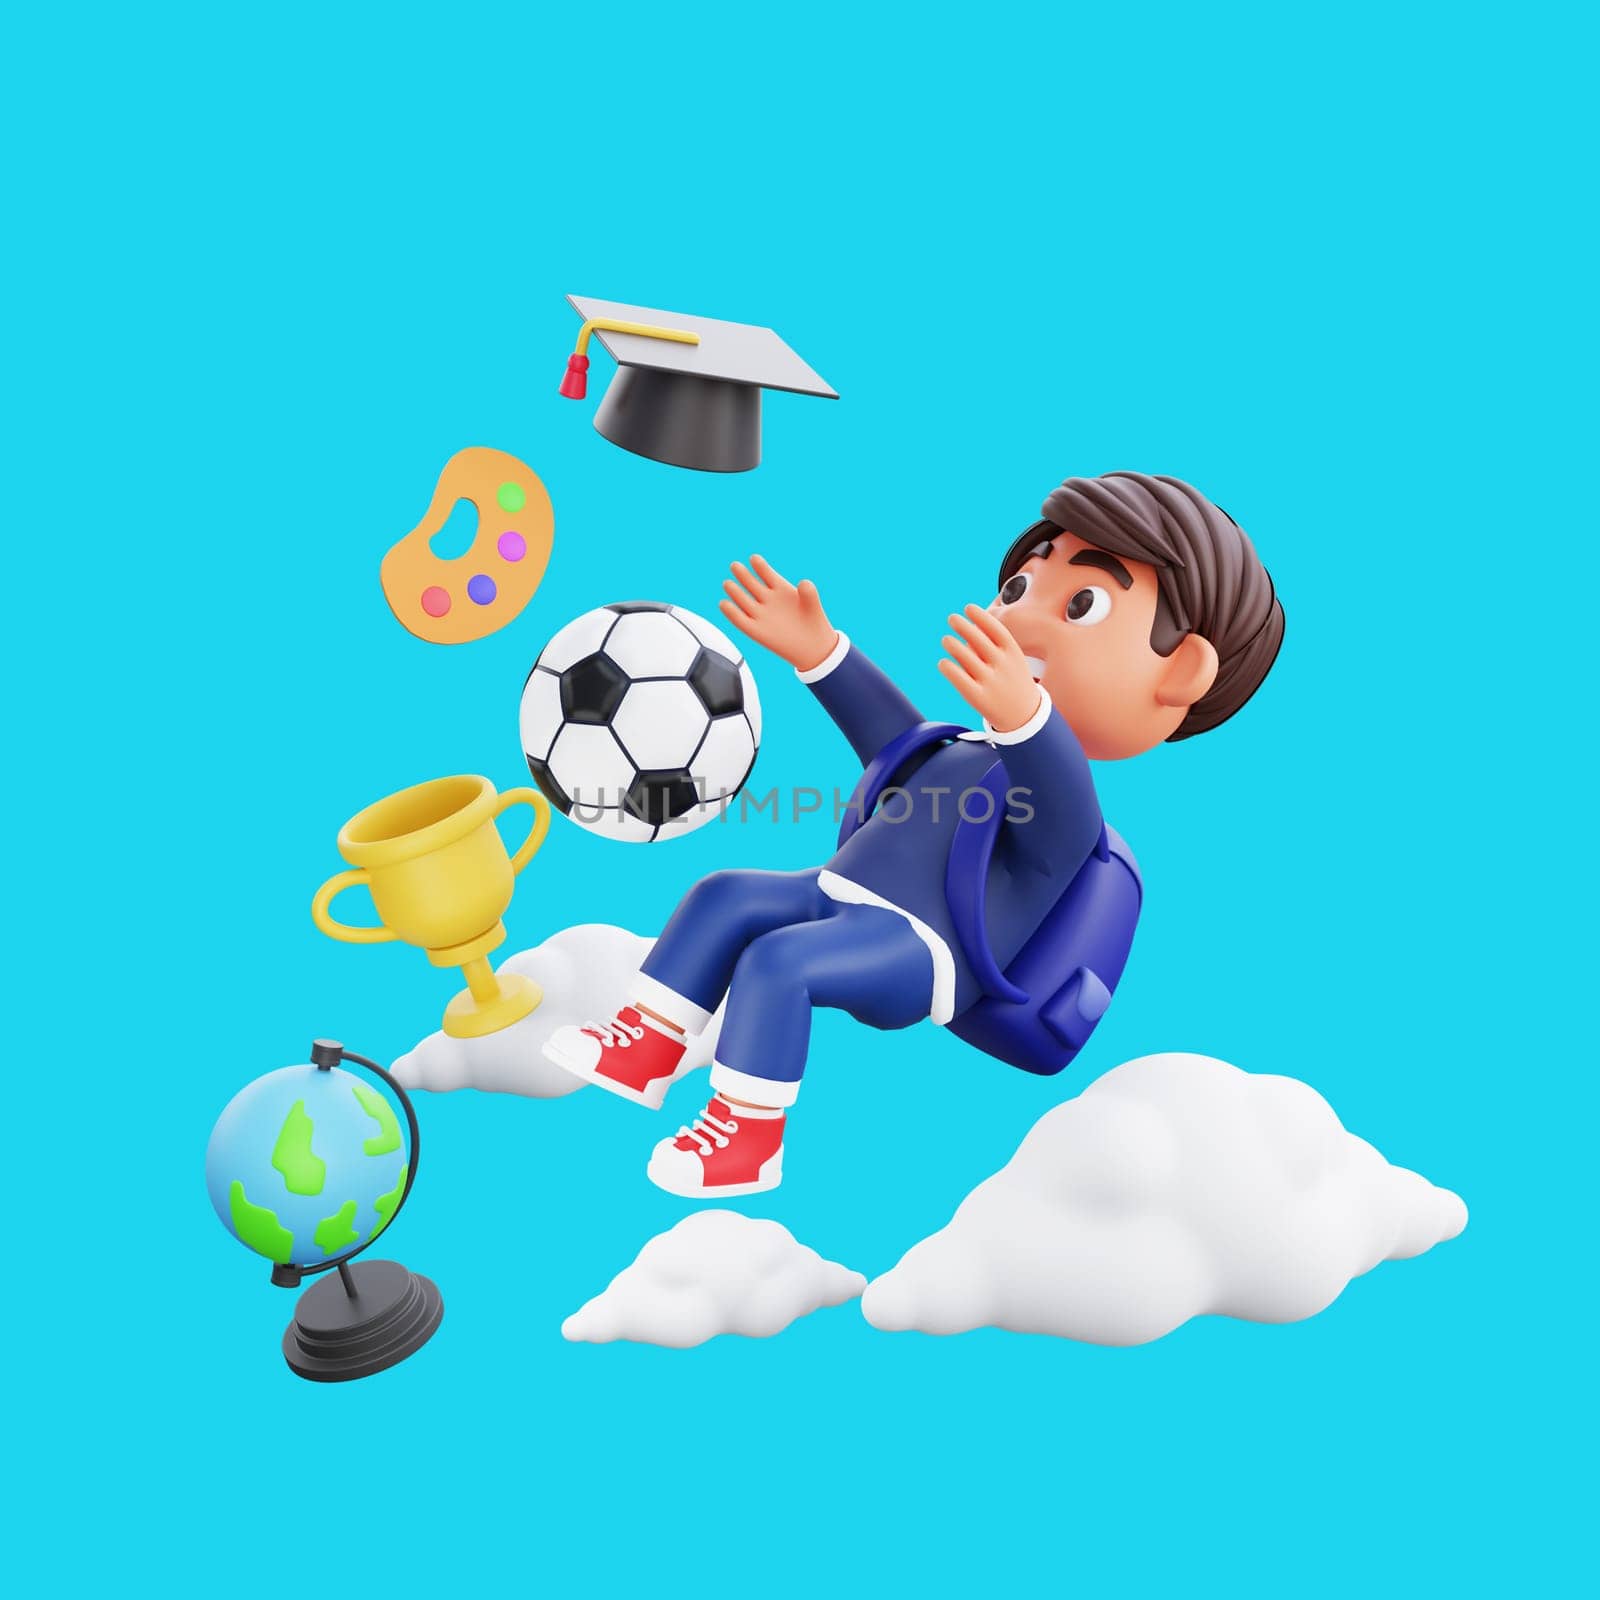 3d cute character flying to reach dreams Back to school concept